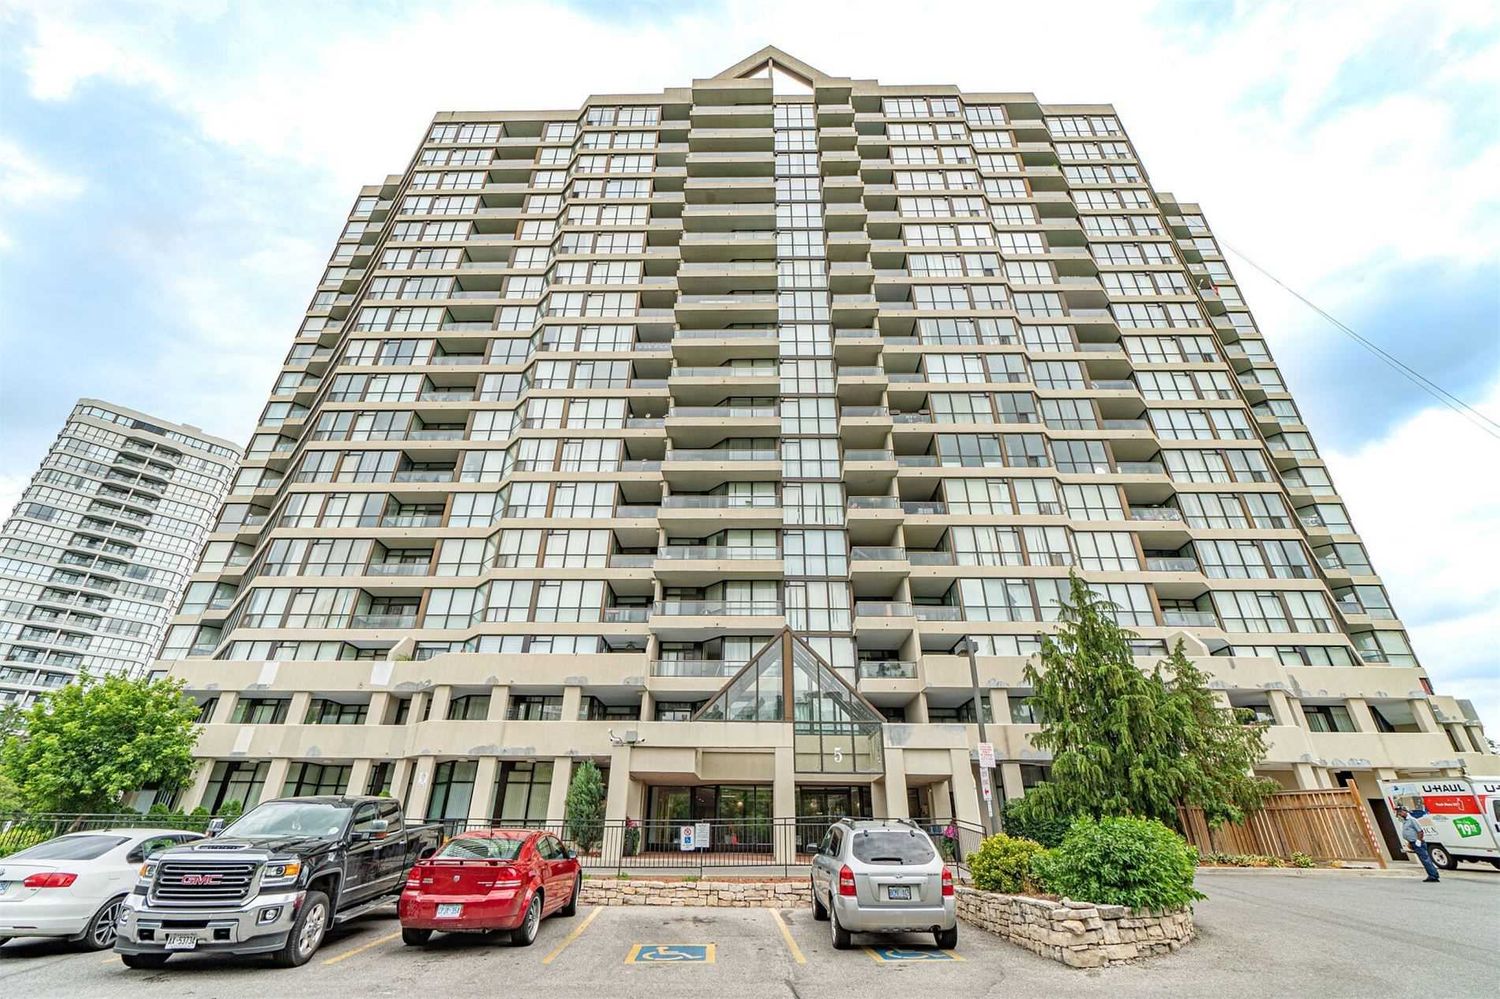 5 Rowntree Rd. This condo at Platinum on the Humber Condos is located in  Etobicoke, Toronto - image #1 of 2 by Strata.ca